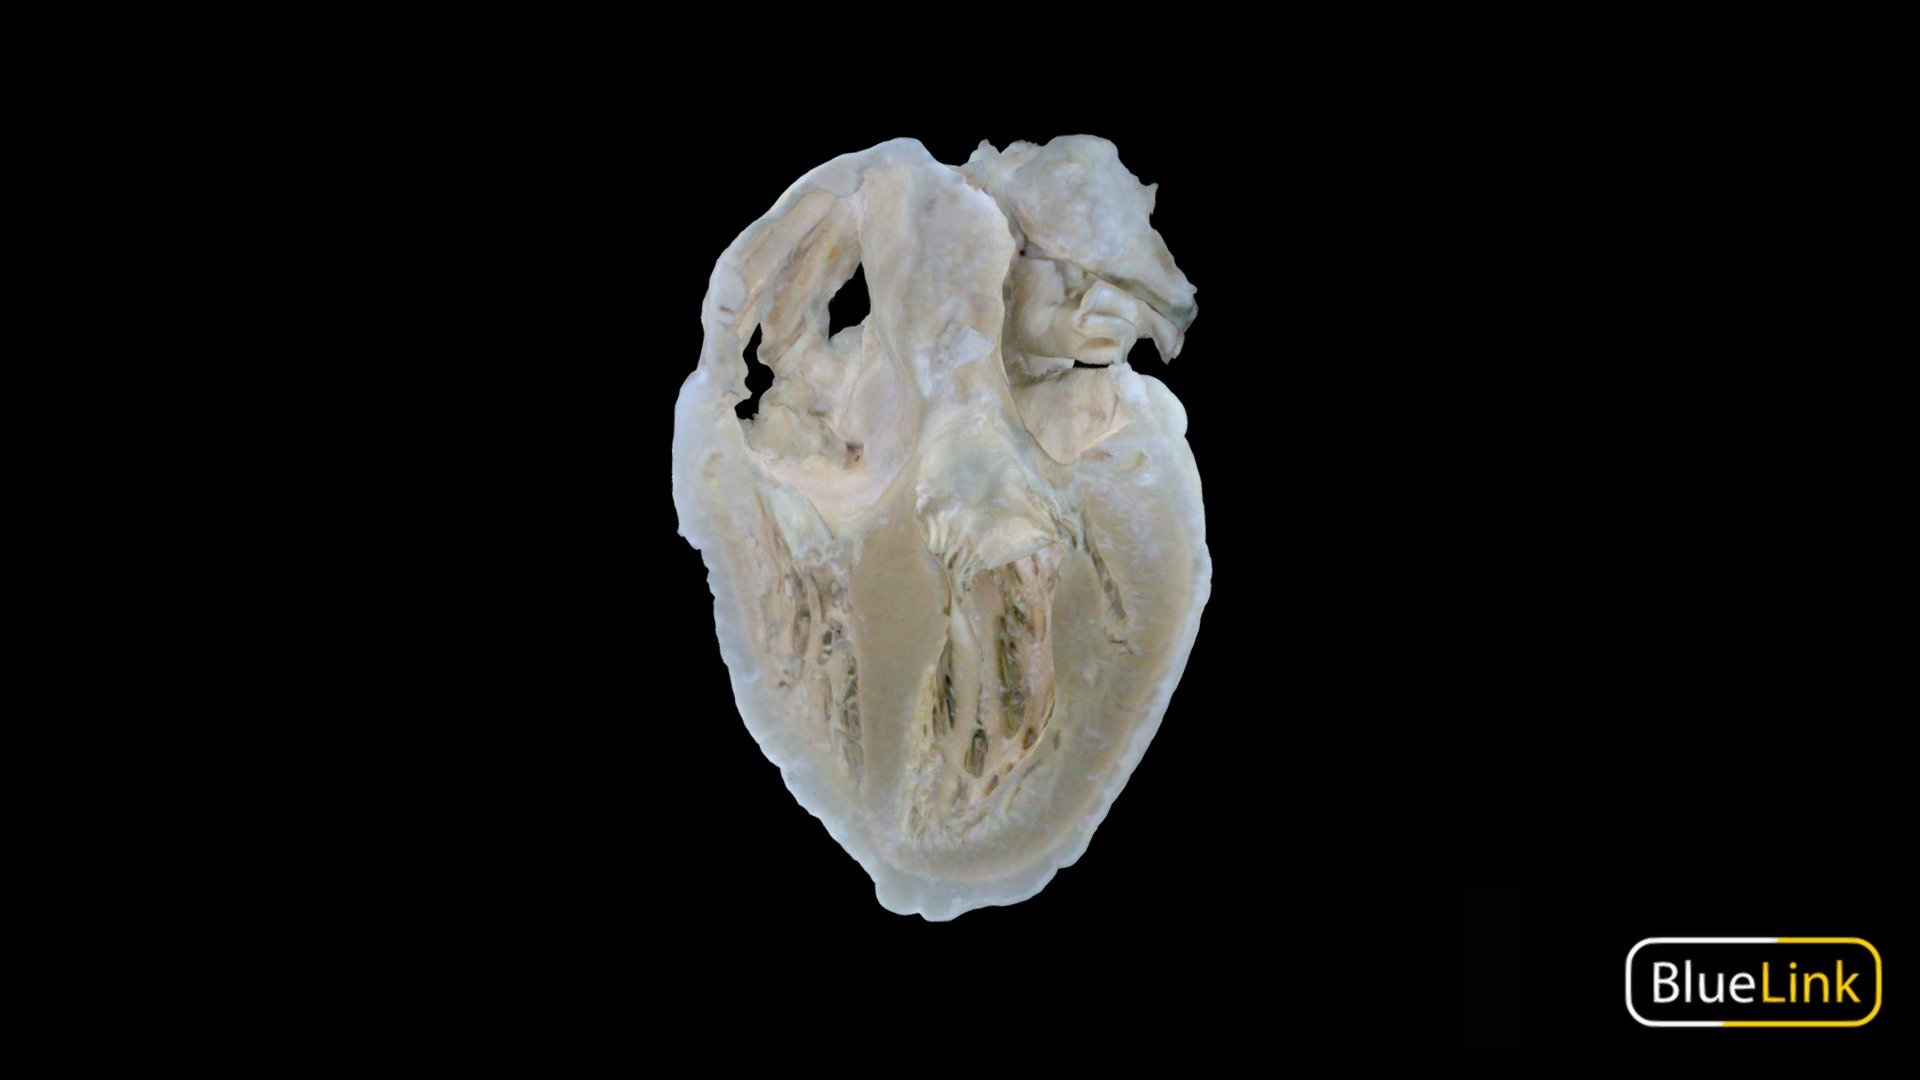 Hemisection of human heart 
Captured with: Einscan Pro
Captured by: Will Gribbin
Edited by: Cristina Prall
Univesity of Michigan
91008-C01 - Atria & Ventricles - Hemisection 2 - 3D model by Bluelink Anatomy - University of Michigan (@bluelinkanatomy) 3d model